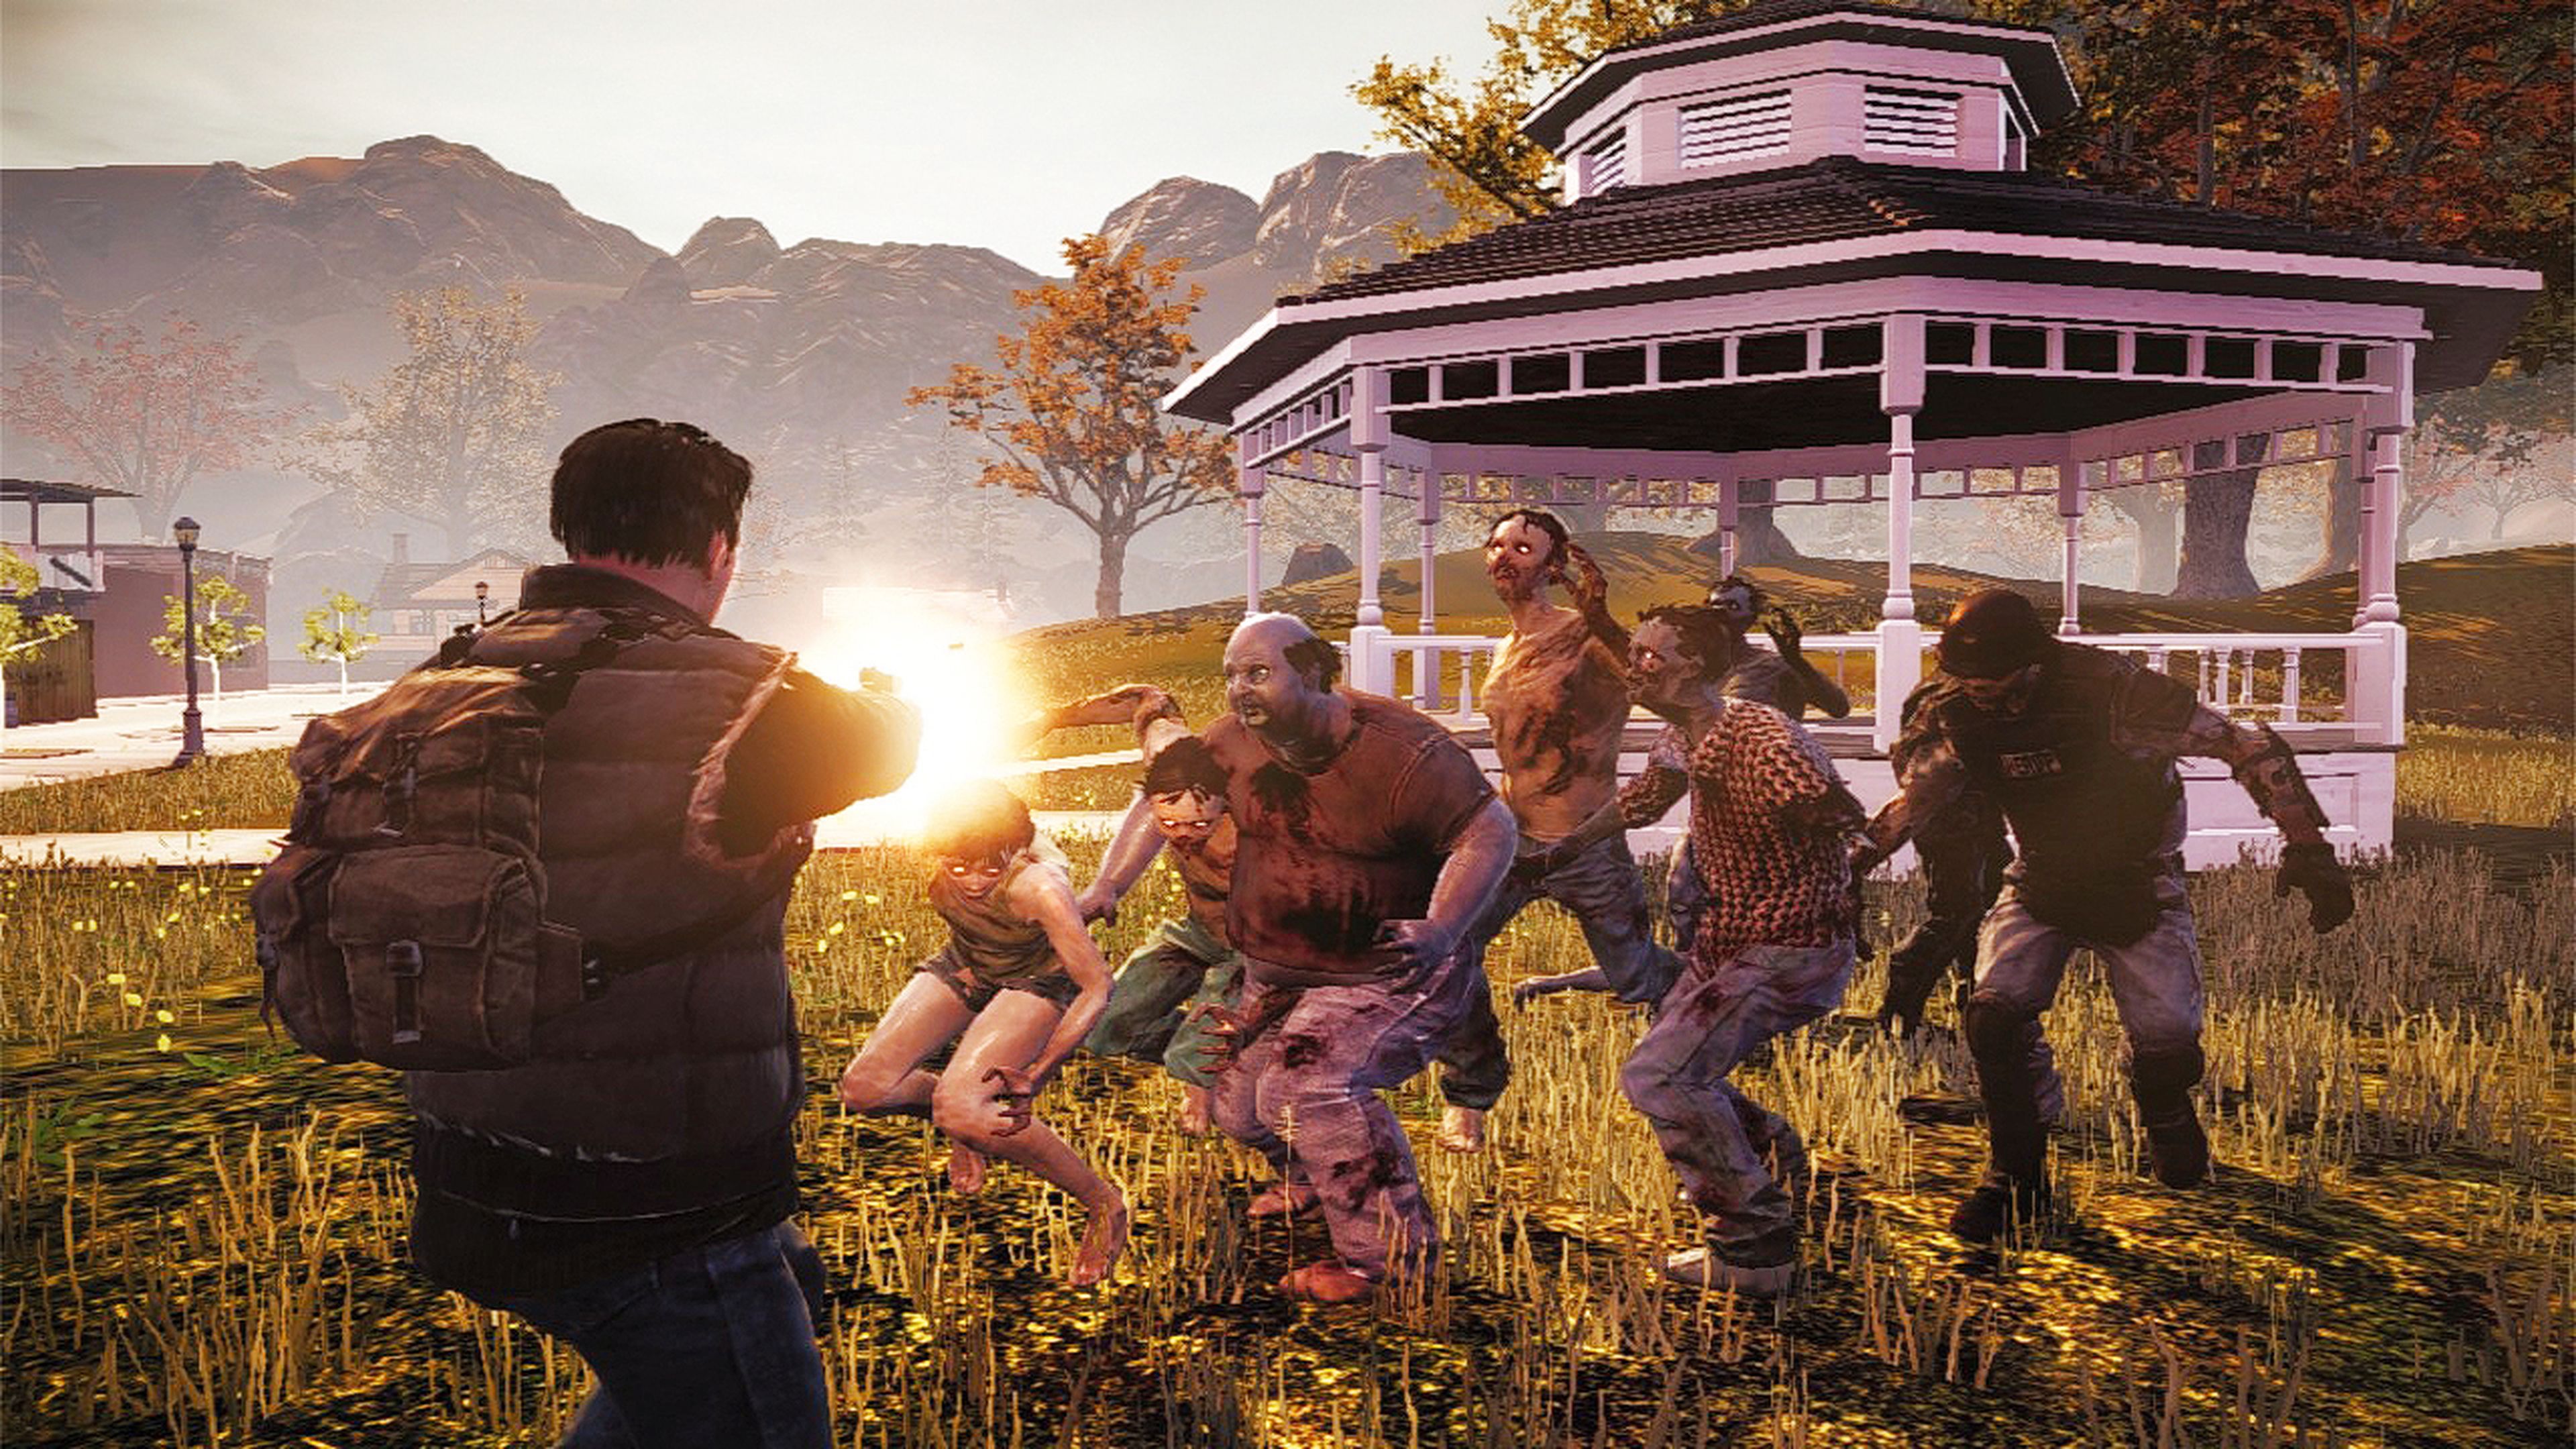 Представлены игры такие как. State of Decay 2. State of Decay Xbox 360. State of Decay 1.